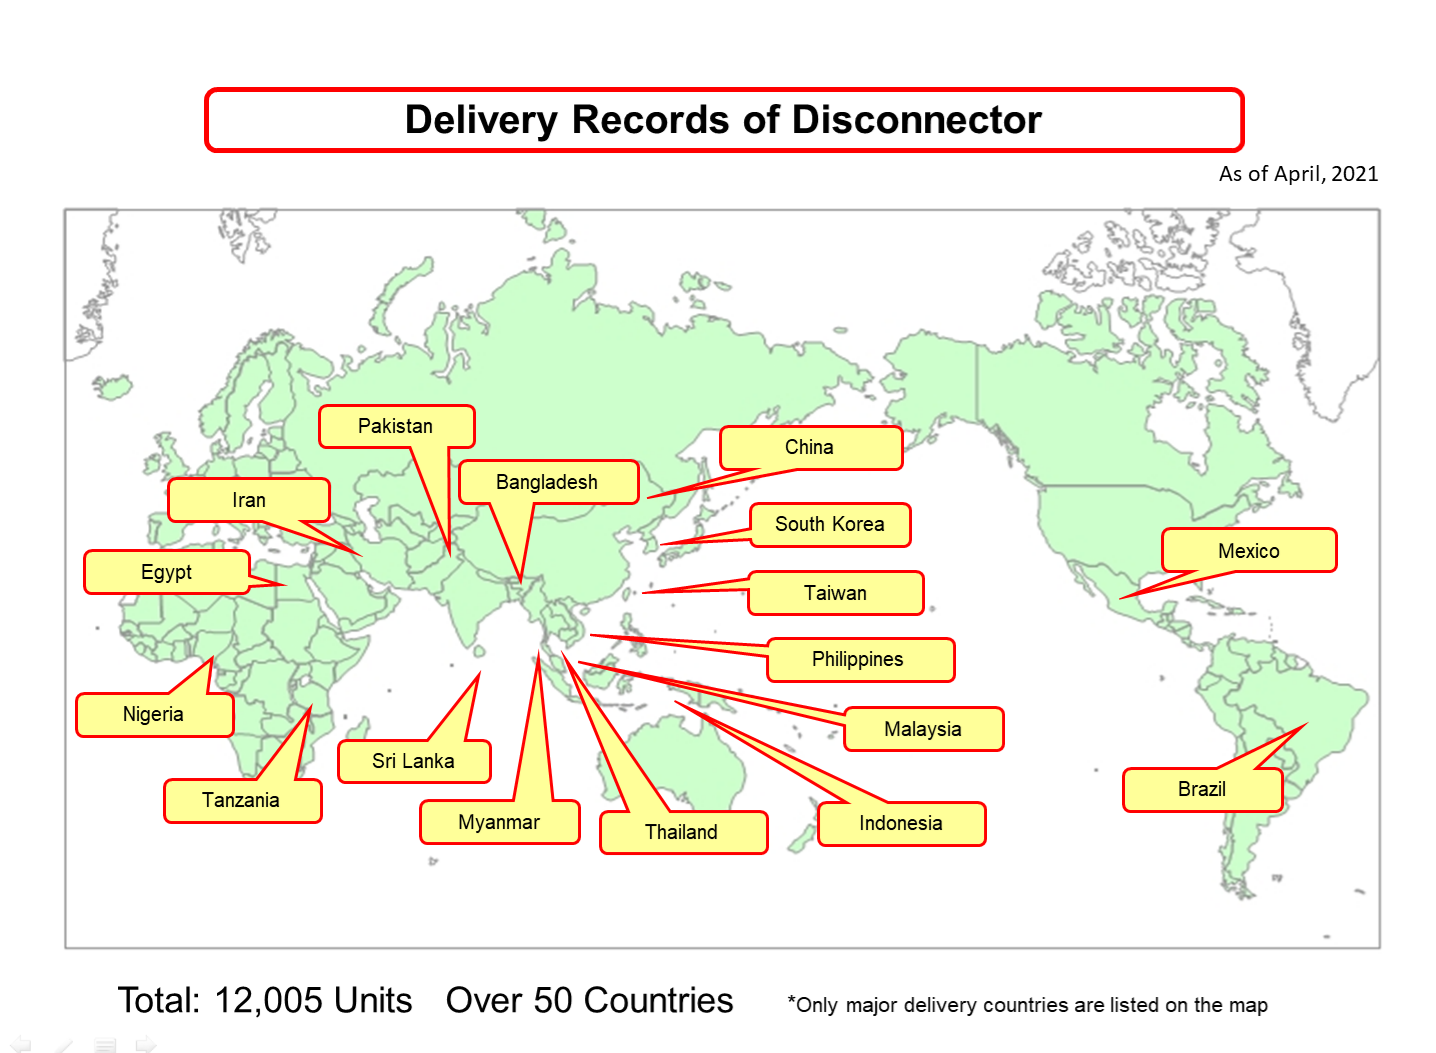 Delivery records of Disconnector